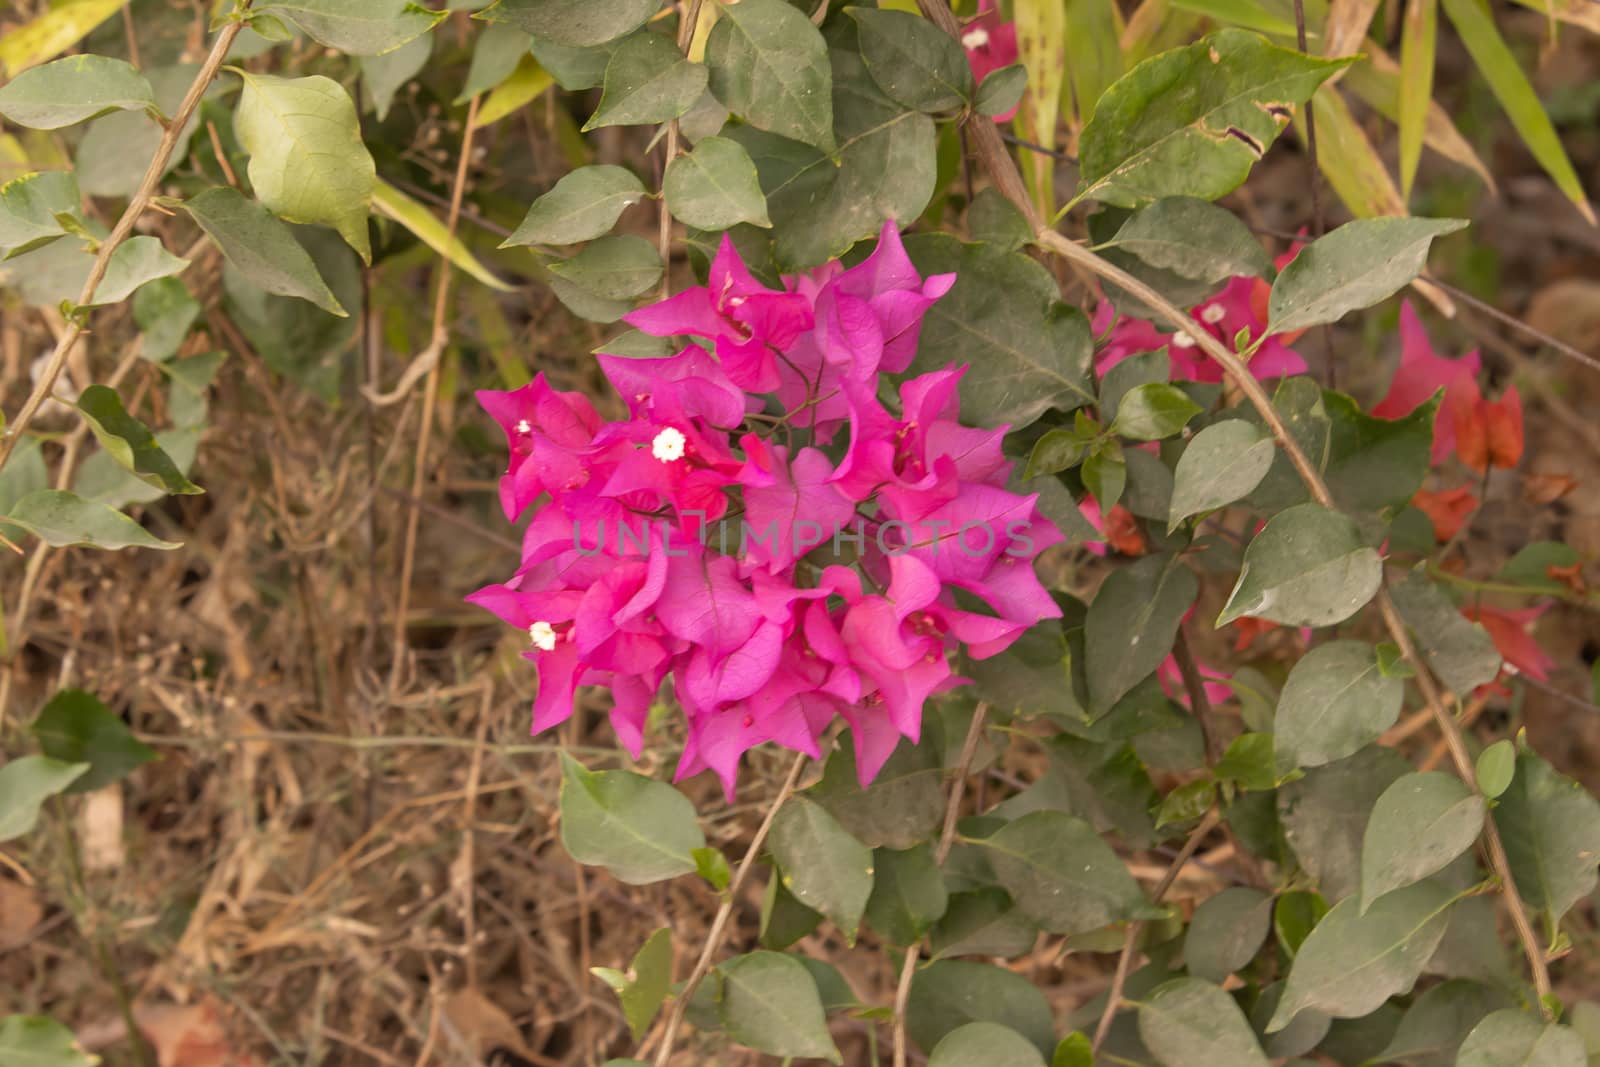 Bougainvillea's pink flowers bloom on trees in spring by 9500102400